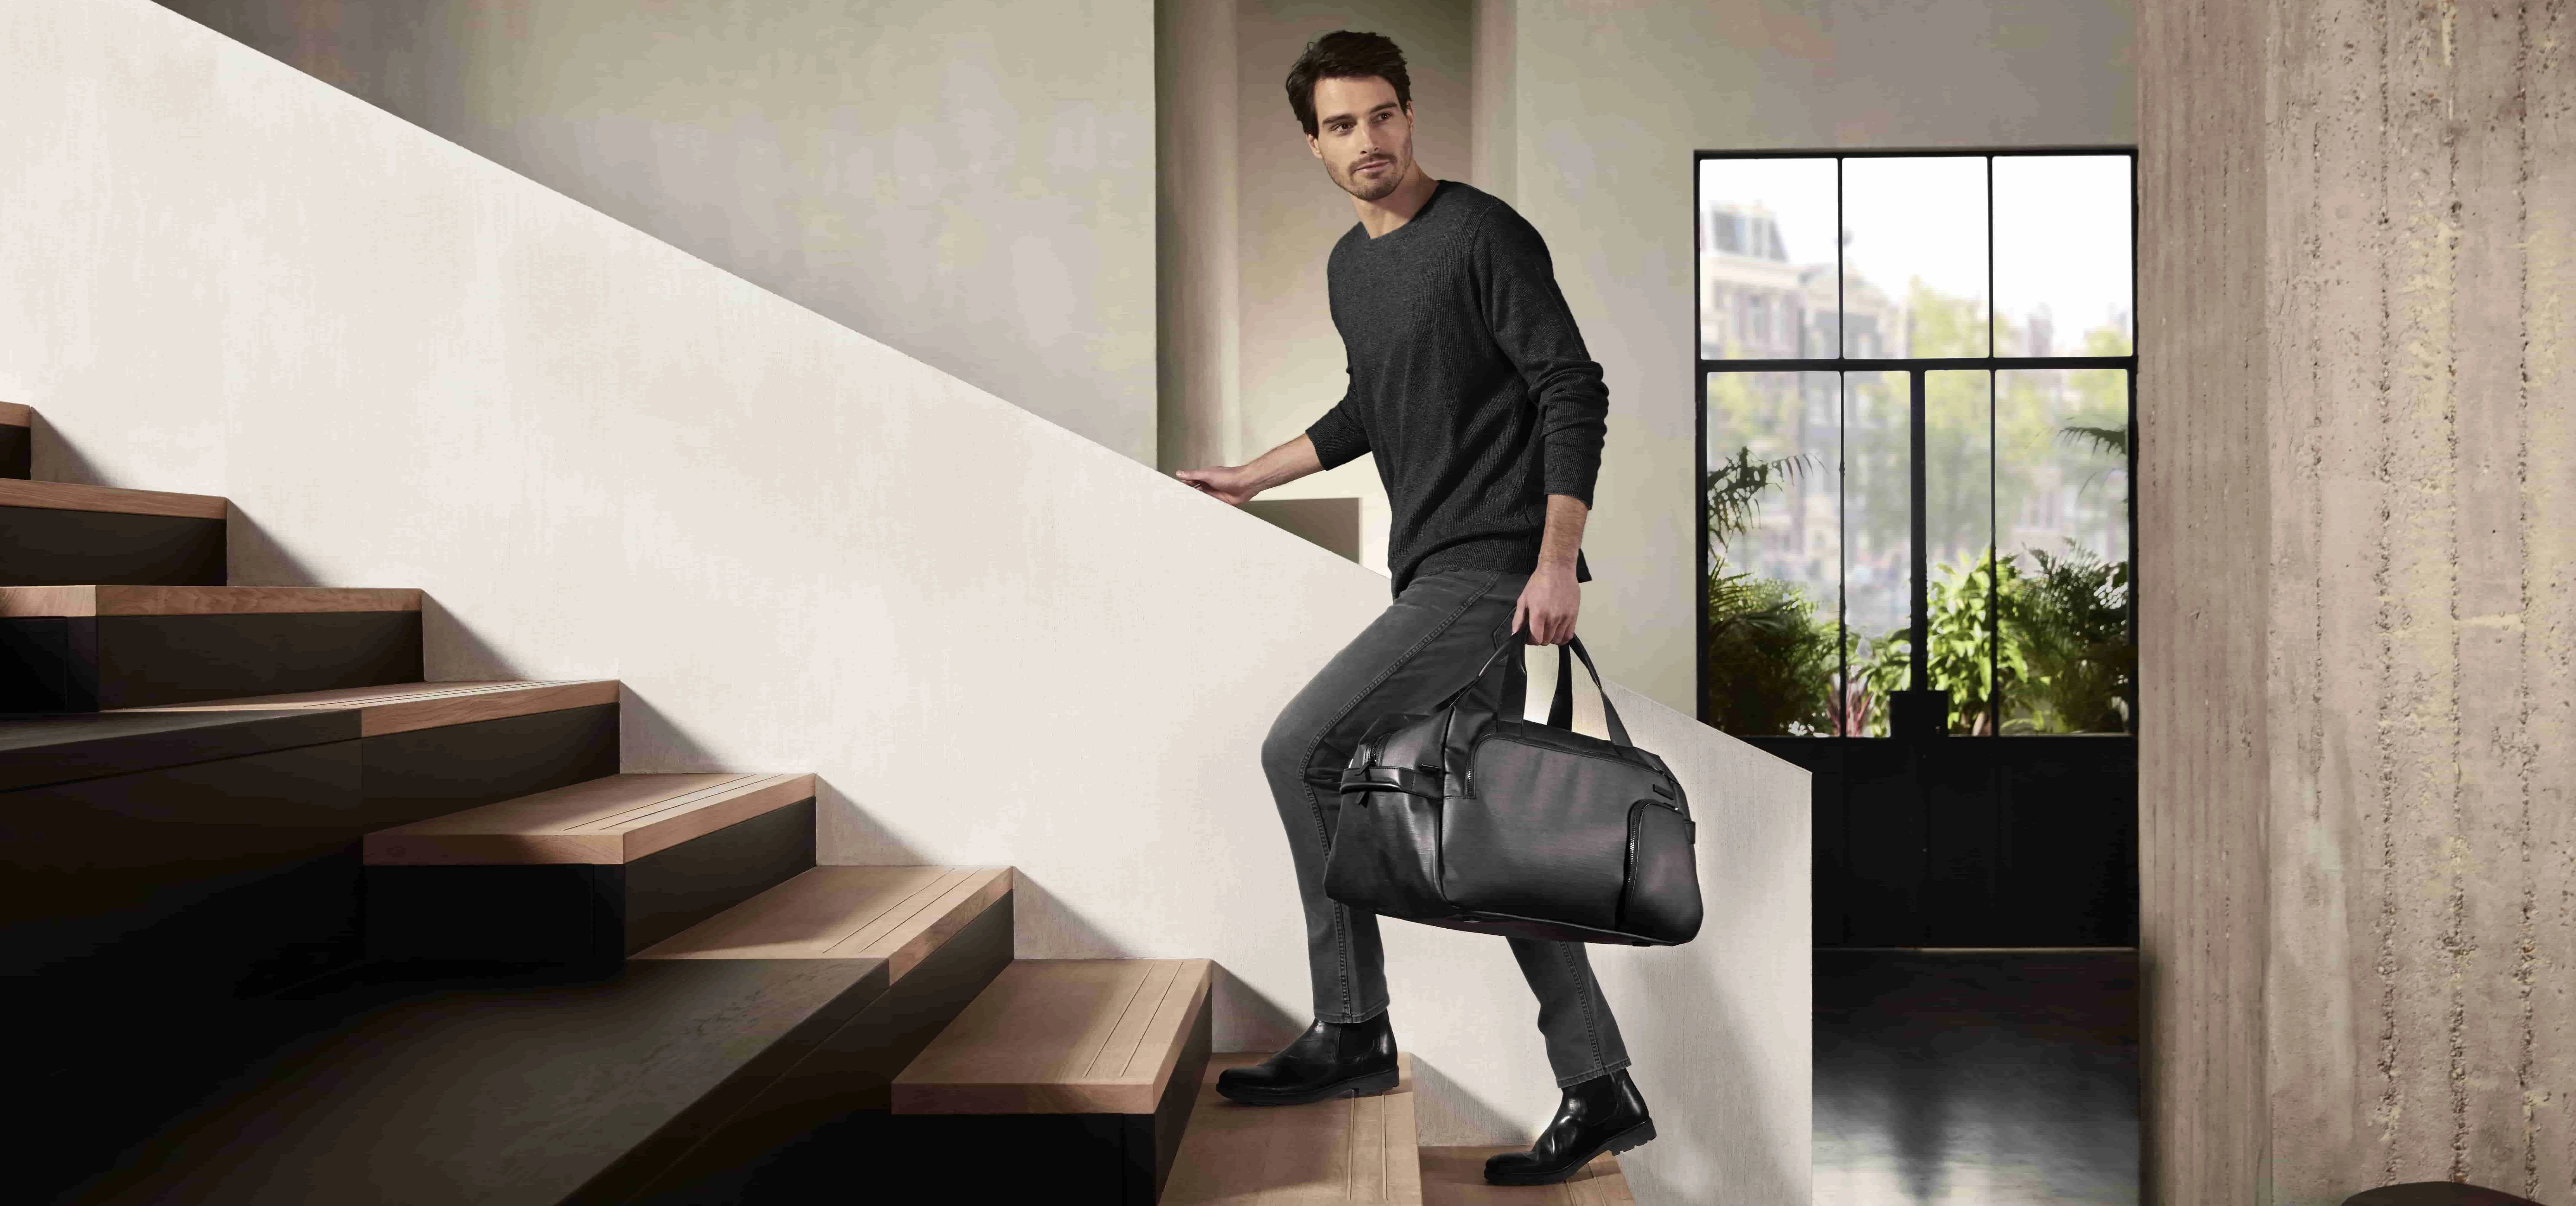 The Samsonite collection is available on Rolling Luggage